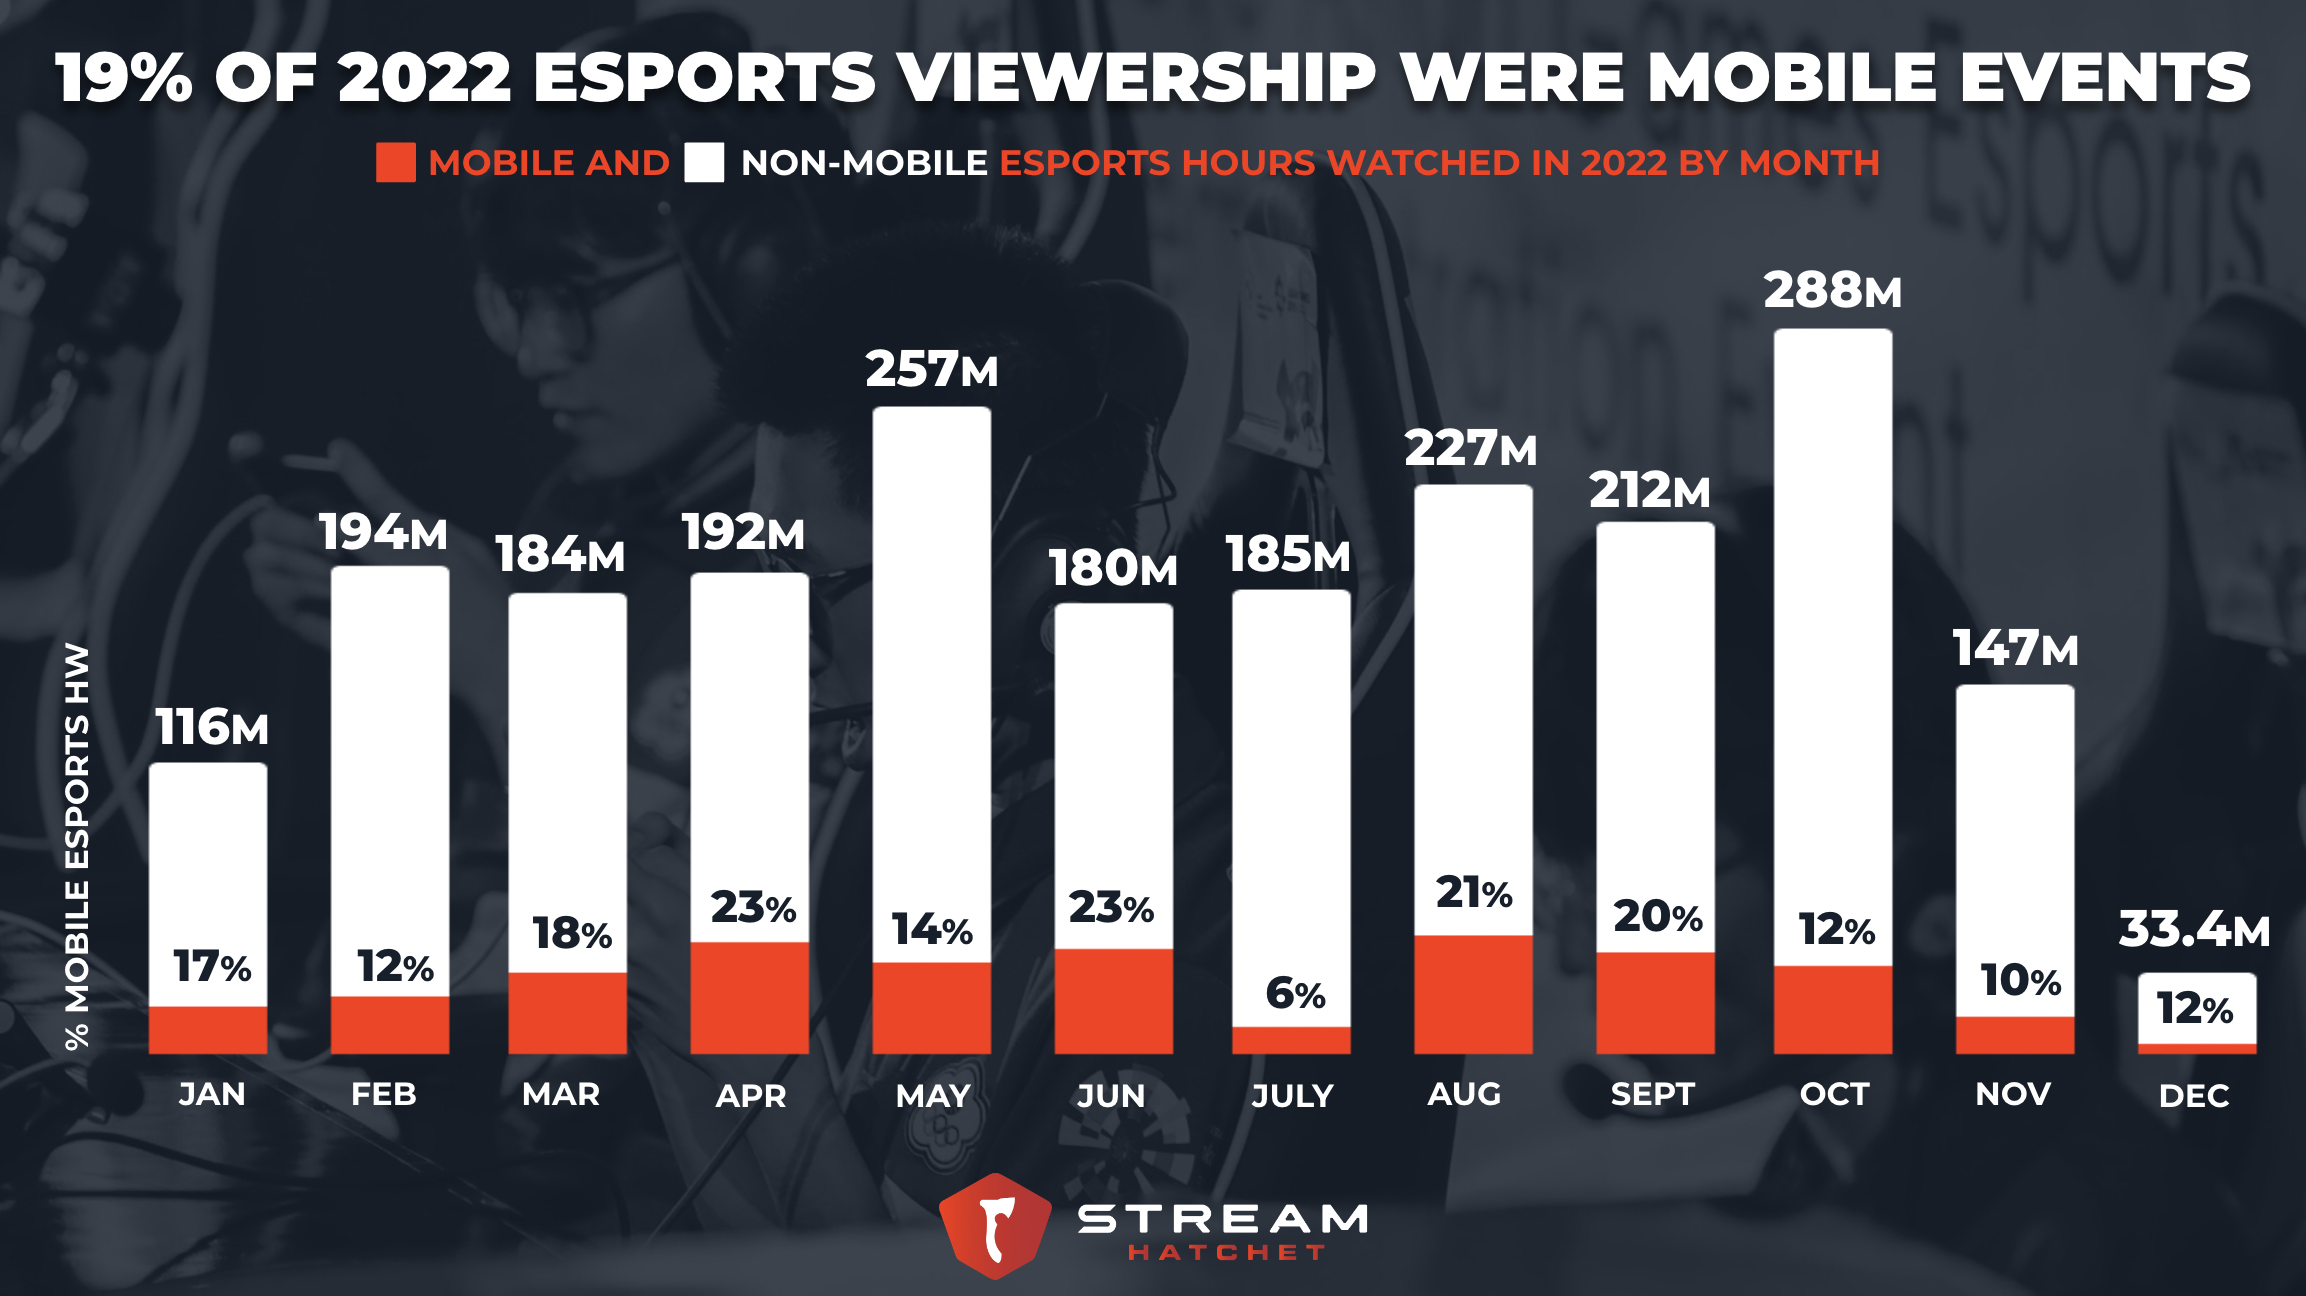 19% OF 2022 ESPORTS VIEWERSHIP WERE MOBILE EVENTS